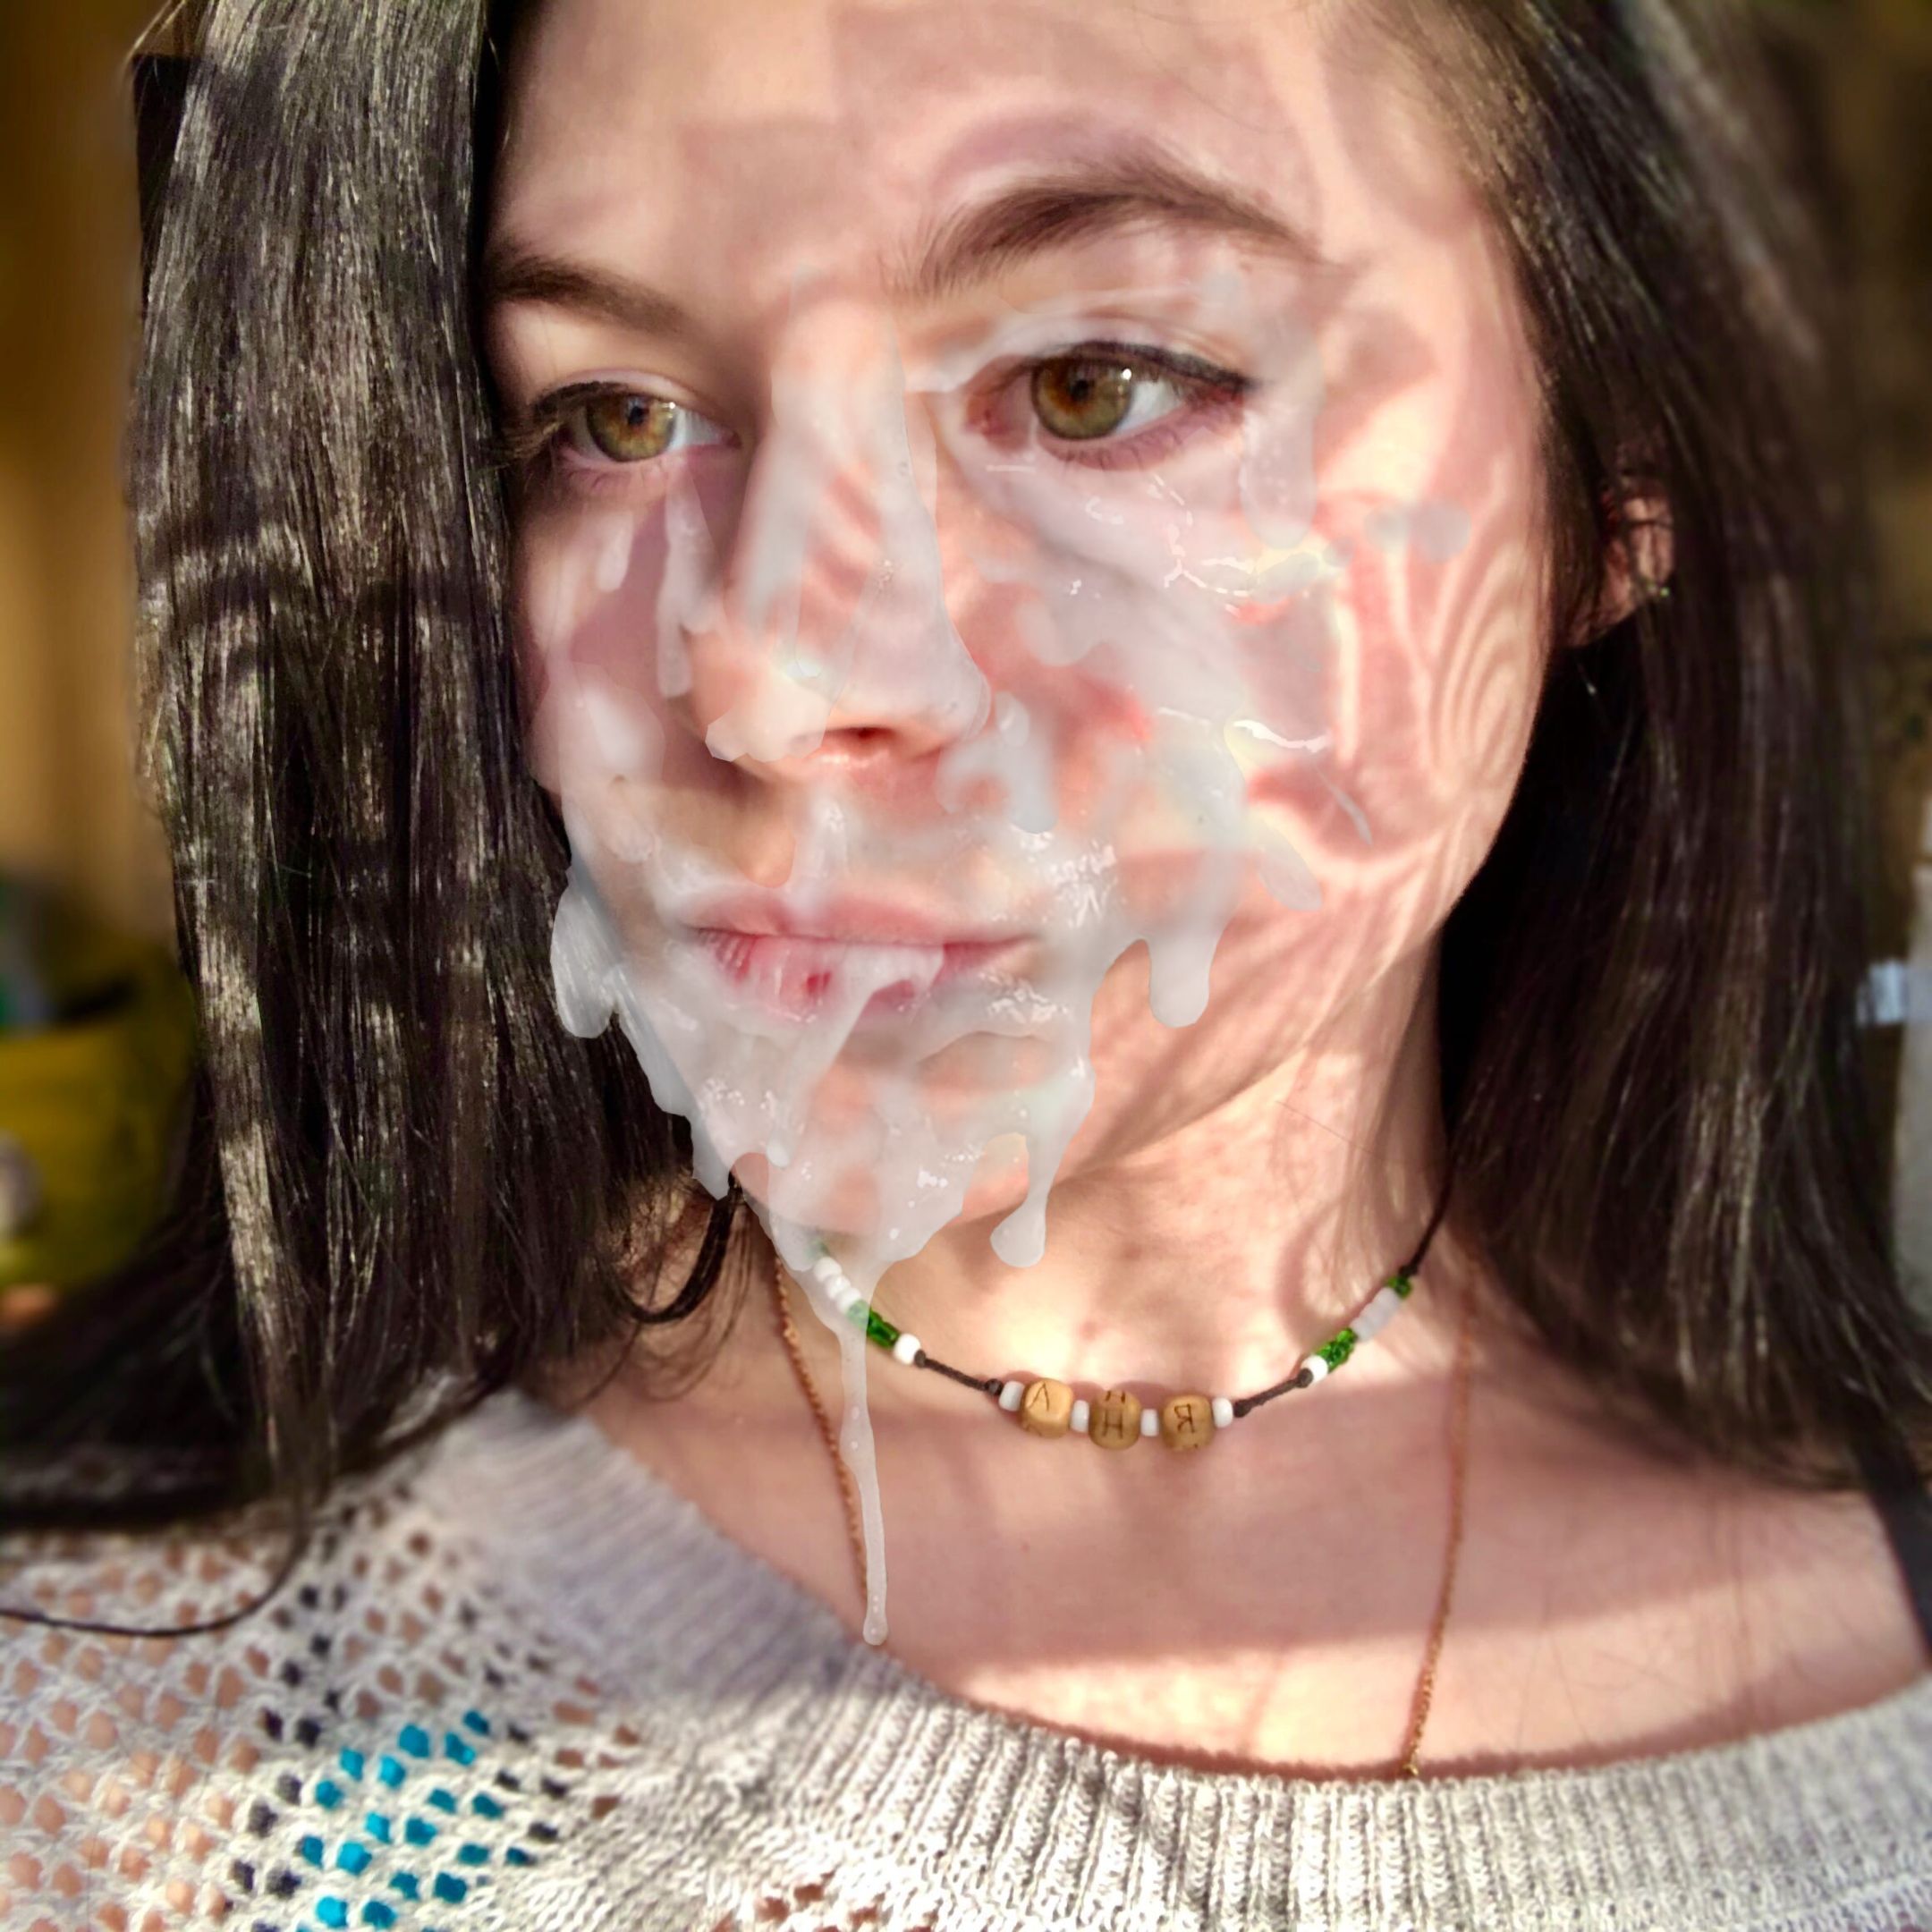 Hot girl gets cum all over the face